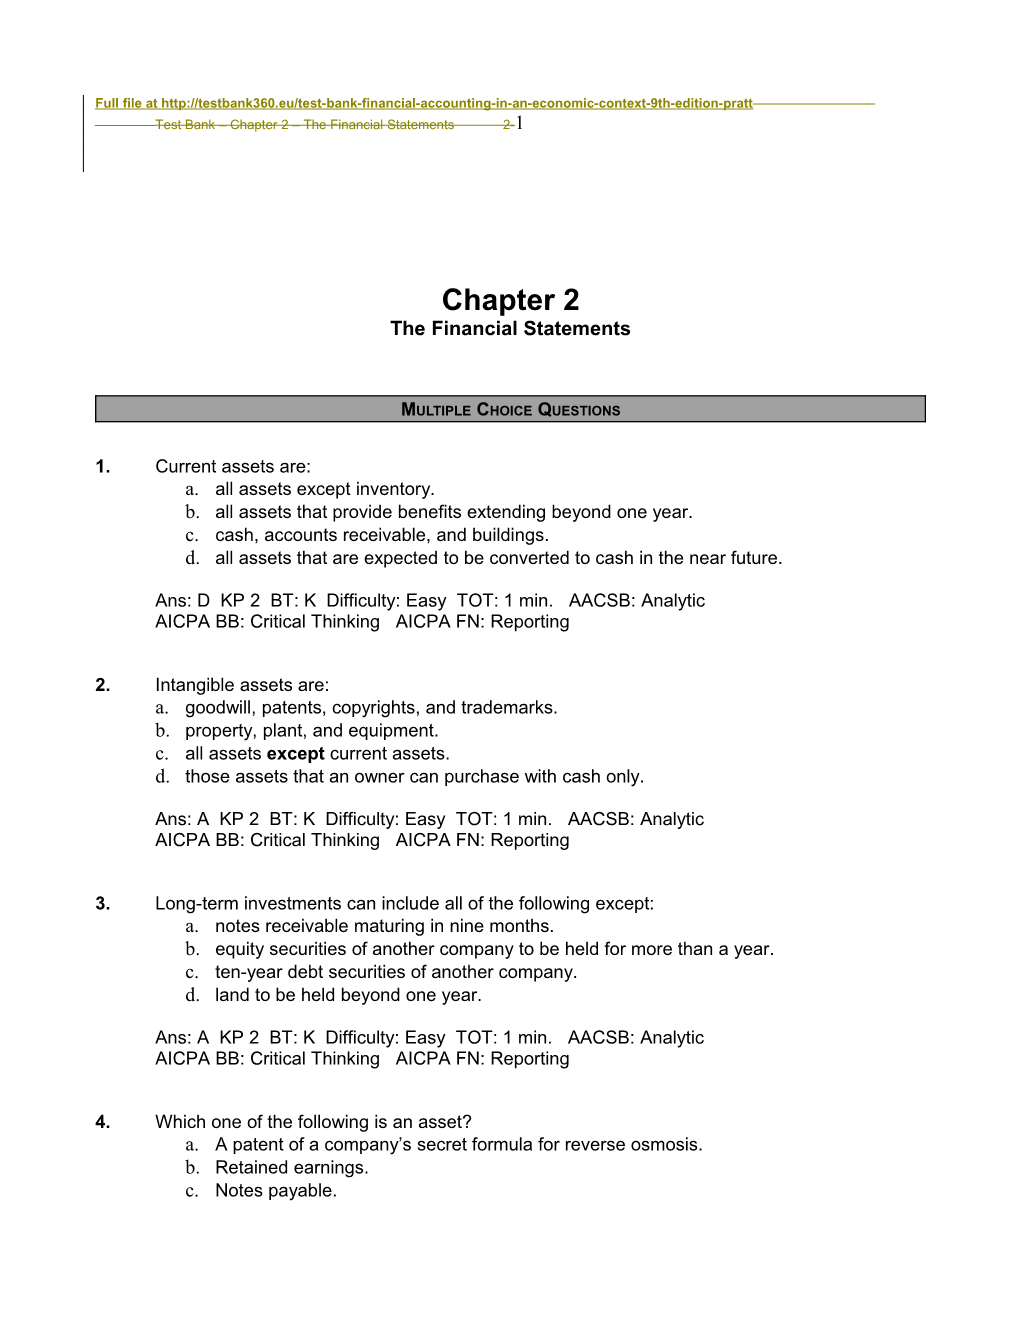 Full File at Test Bank Chapter 2 the Financial Statements 2-15